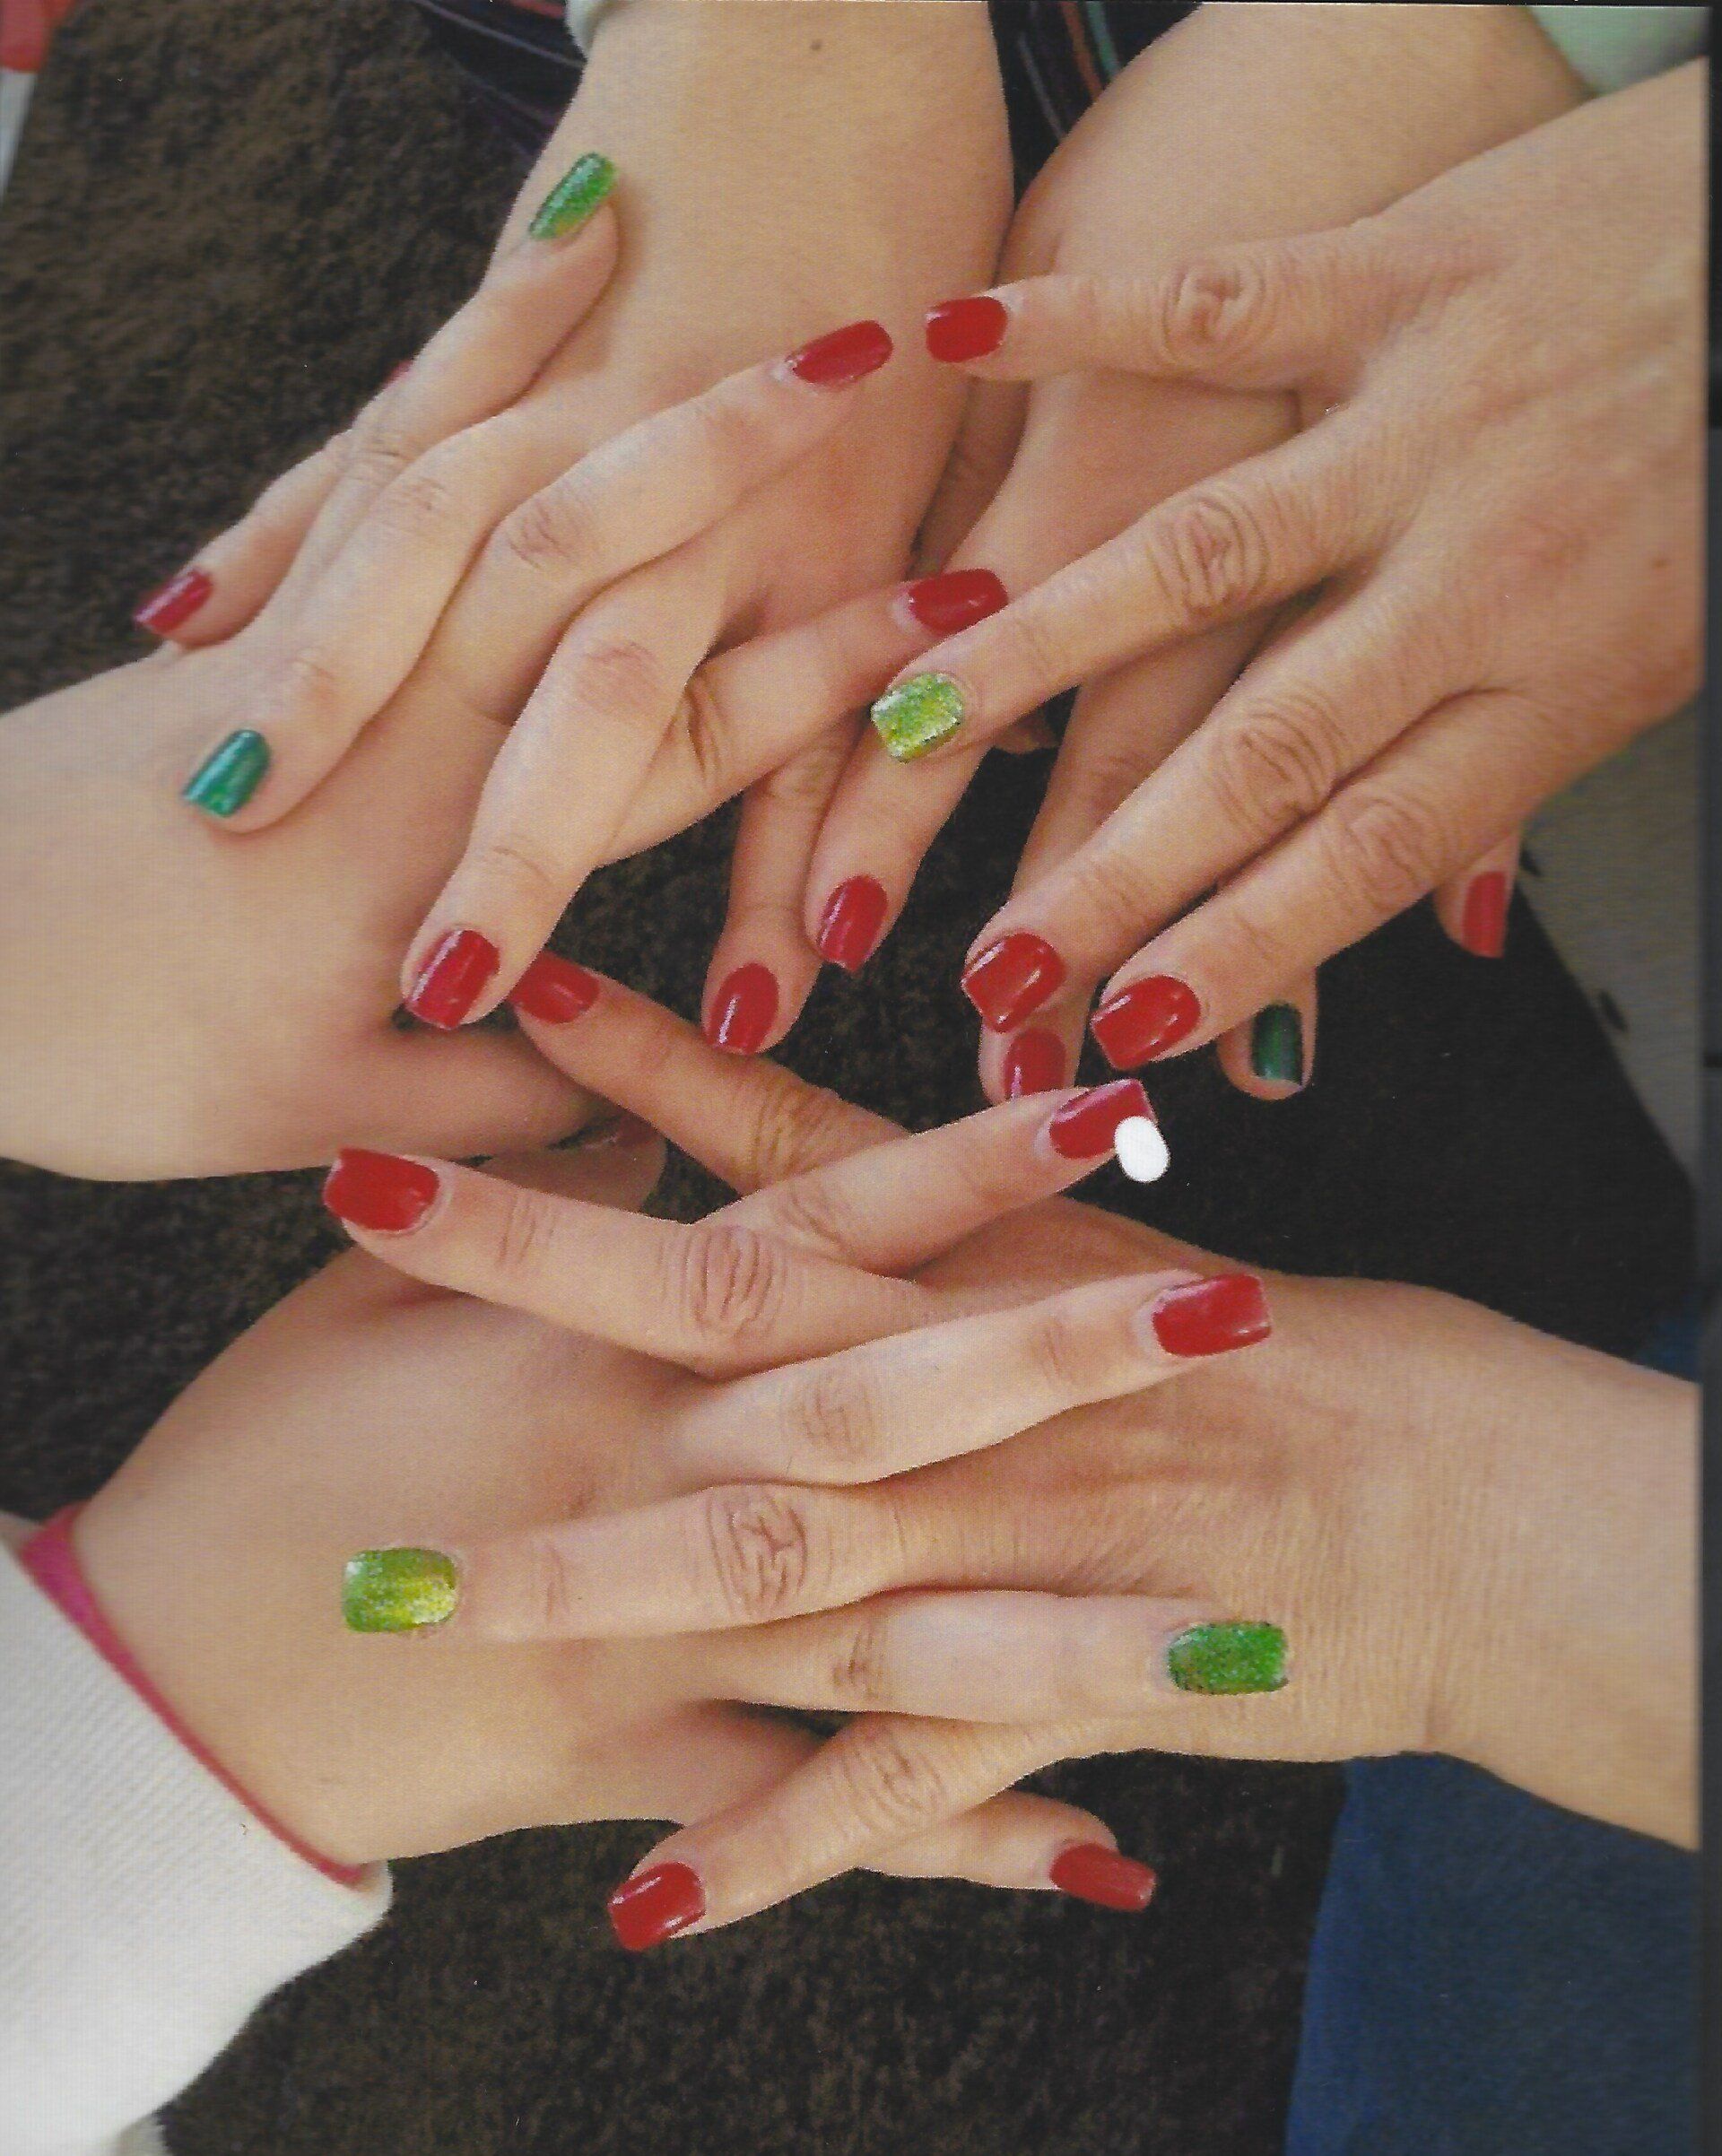 A group of hands with red and green nails are stacked on top of each other